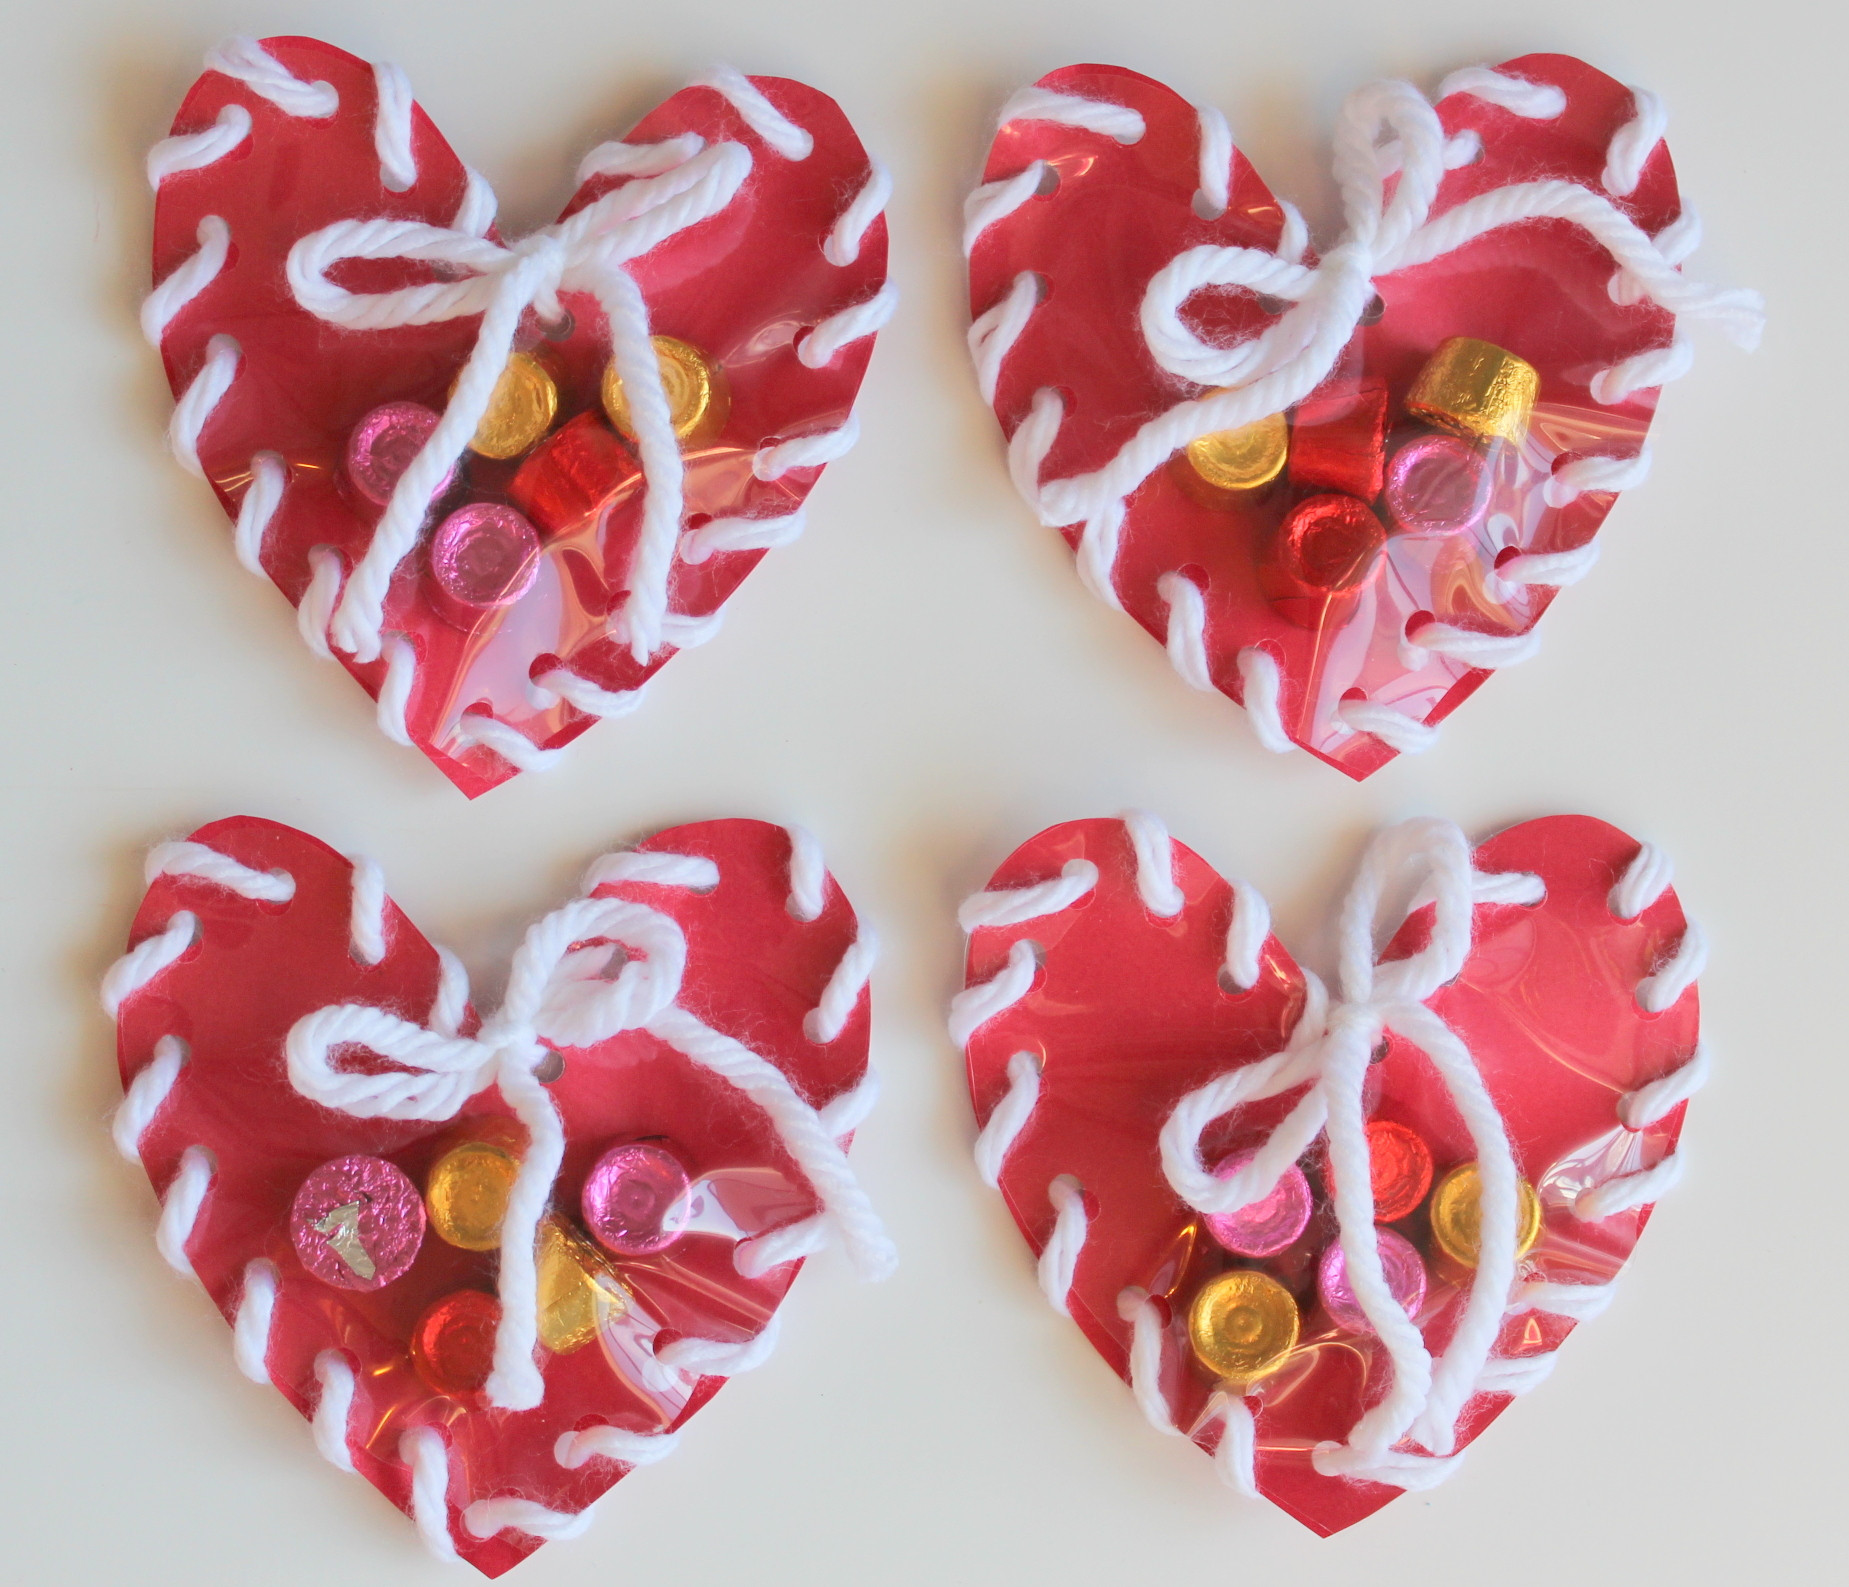 Valentines Craft Ideas For Toddlers
 Lollydot Hand Sewn Paper Heart Valentine Craft for Kids